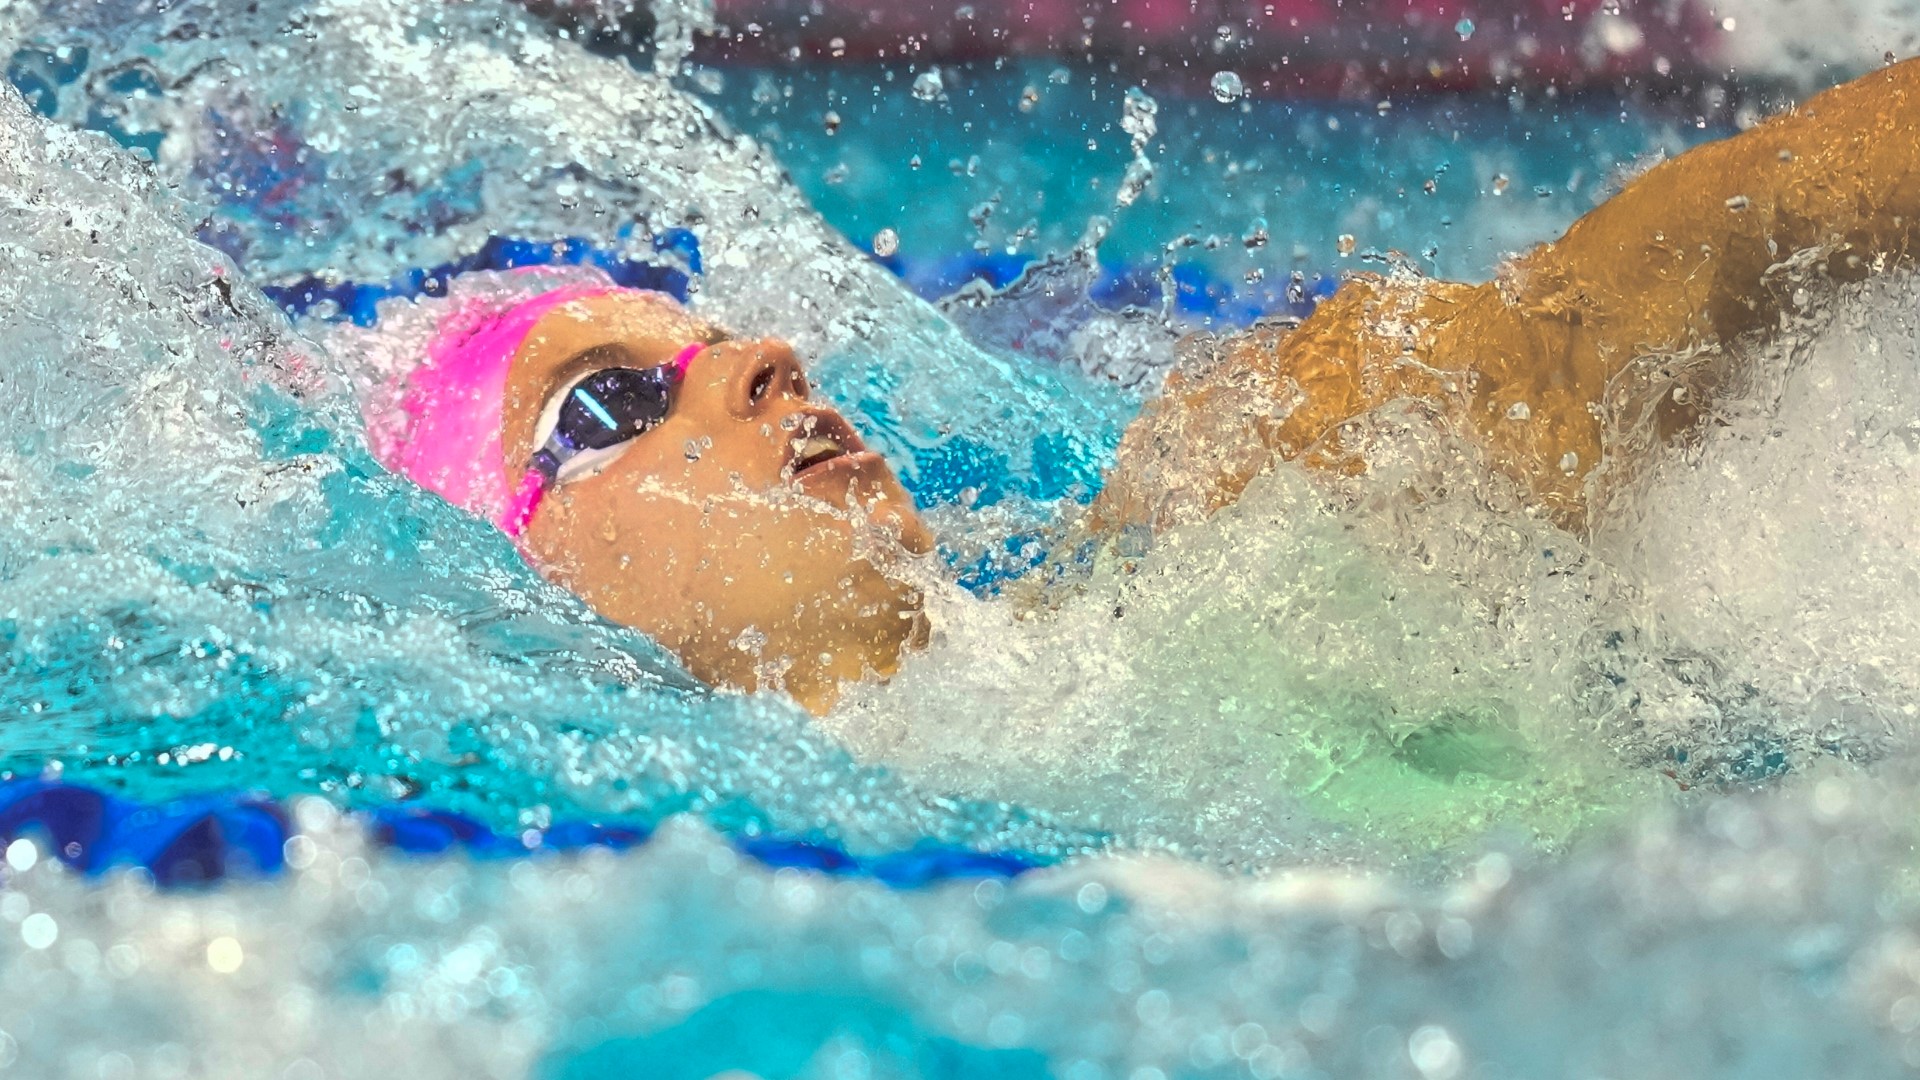 Lakeville's Regan Smith put her collegiate swimming career on hold to train for the Olympics.